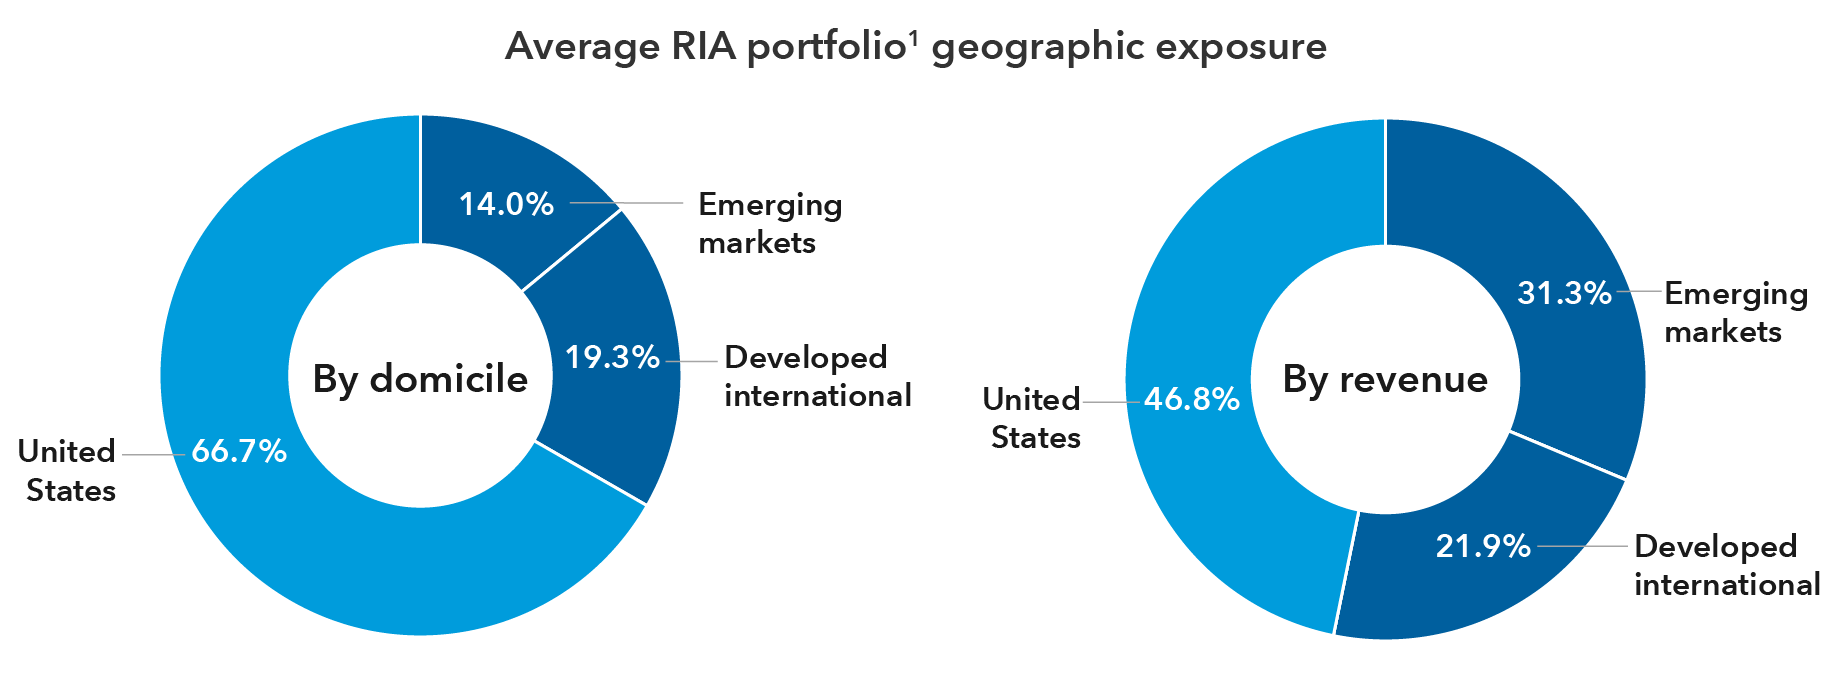 On the left, a pie chart showing the average RIA portfolio’s geographic exposure by company domicile. Exposure to the United States represents 66.7% of the portfolio; developed international represents 19.3%; and emerging markets represents 14.0%. On the right, a pie chart showing the average RIA portfolio’s geographic exposure by company revenue. Exposure to the United States represents 46.8% of the portfolio; developed international represents 21.9%; and emerging markets represents 31.3%.